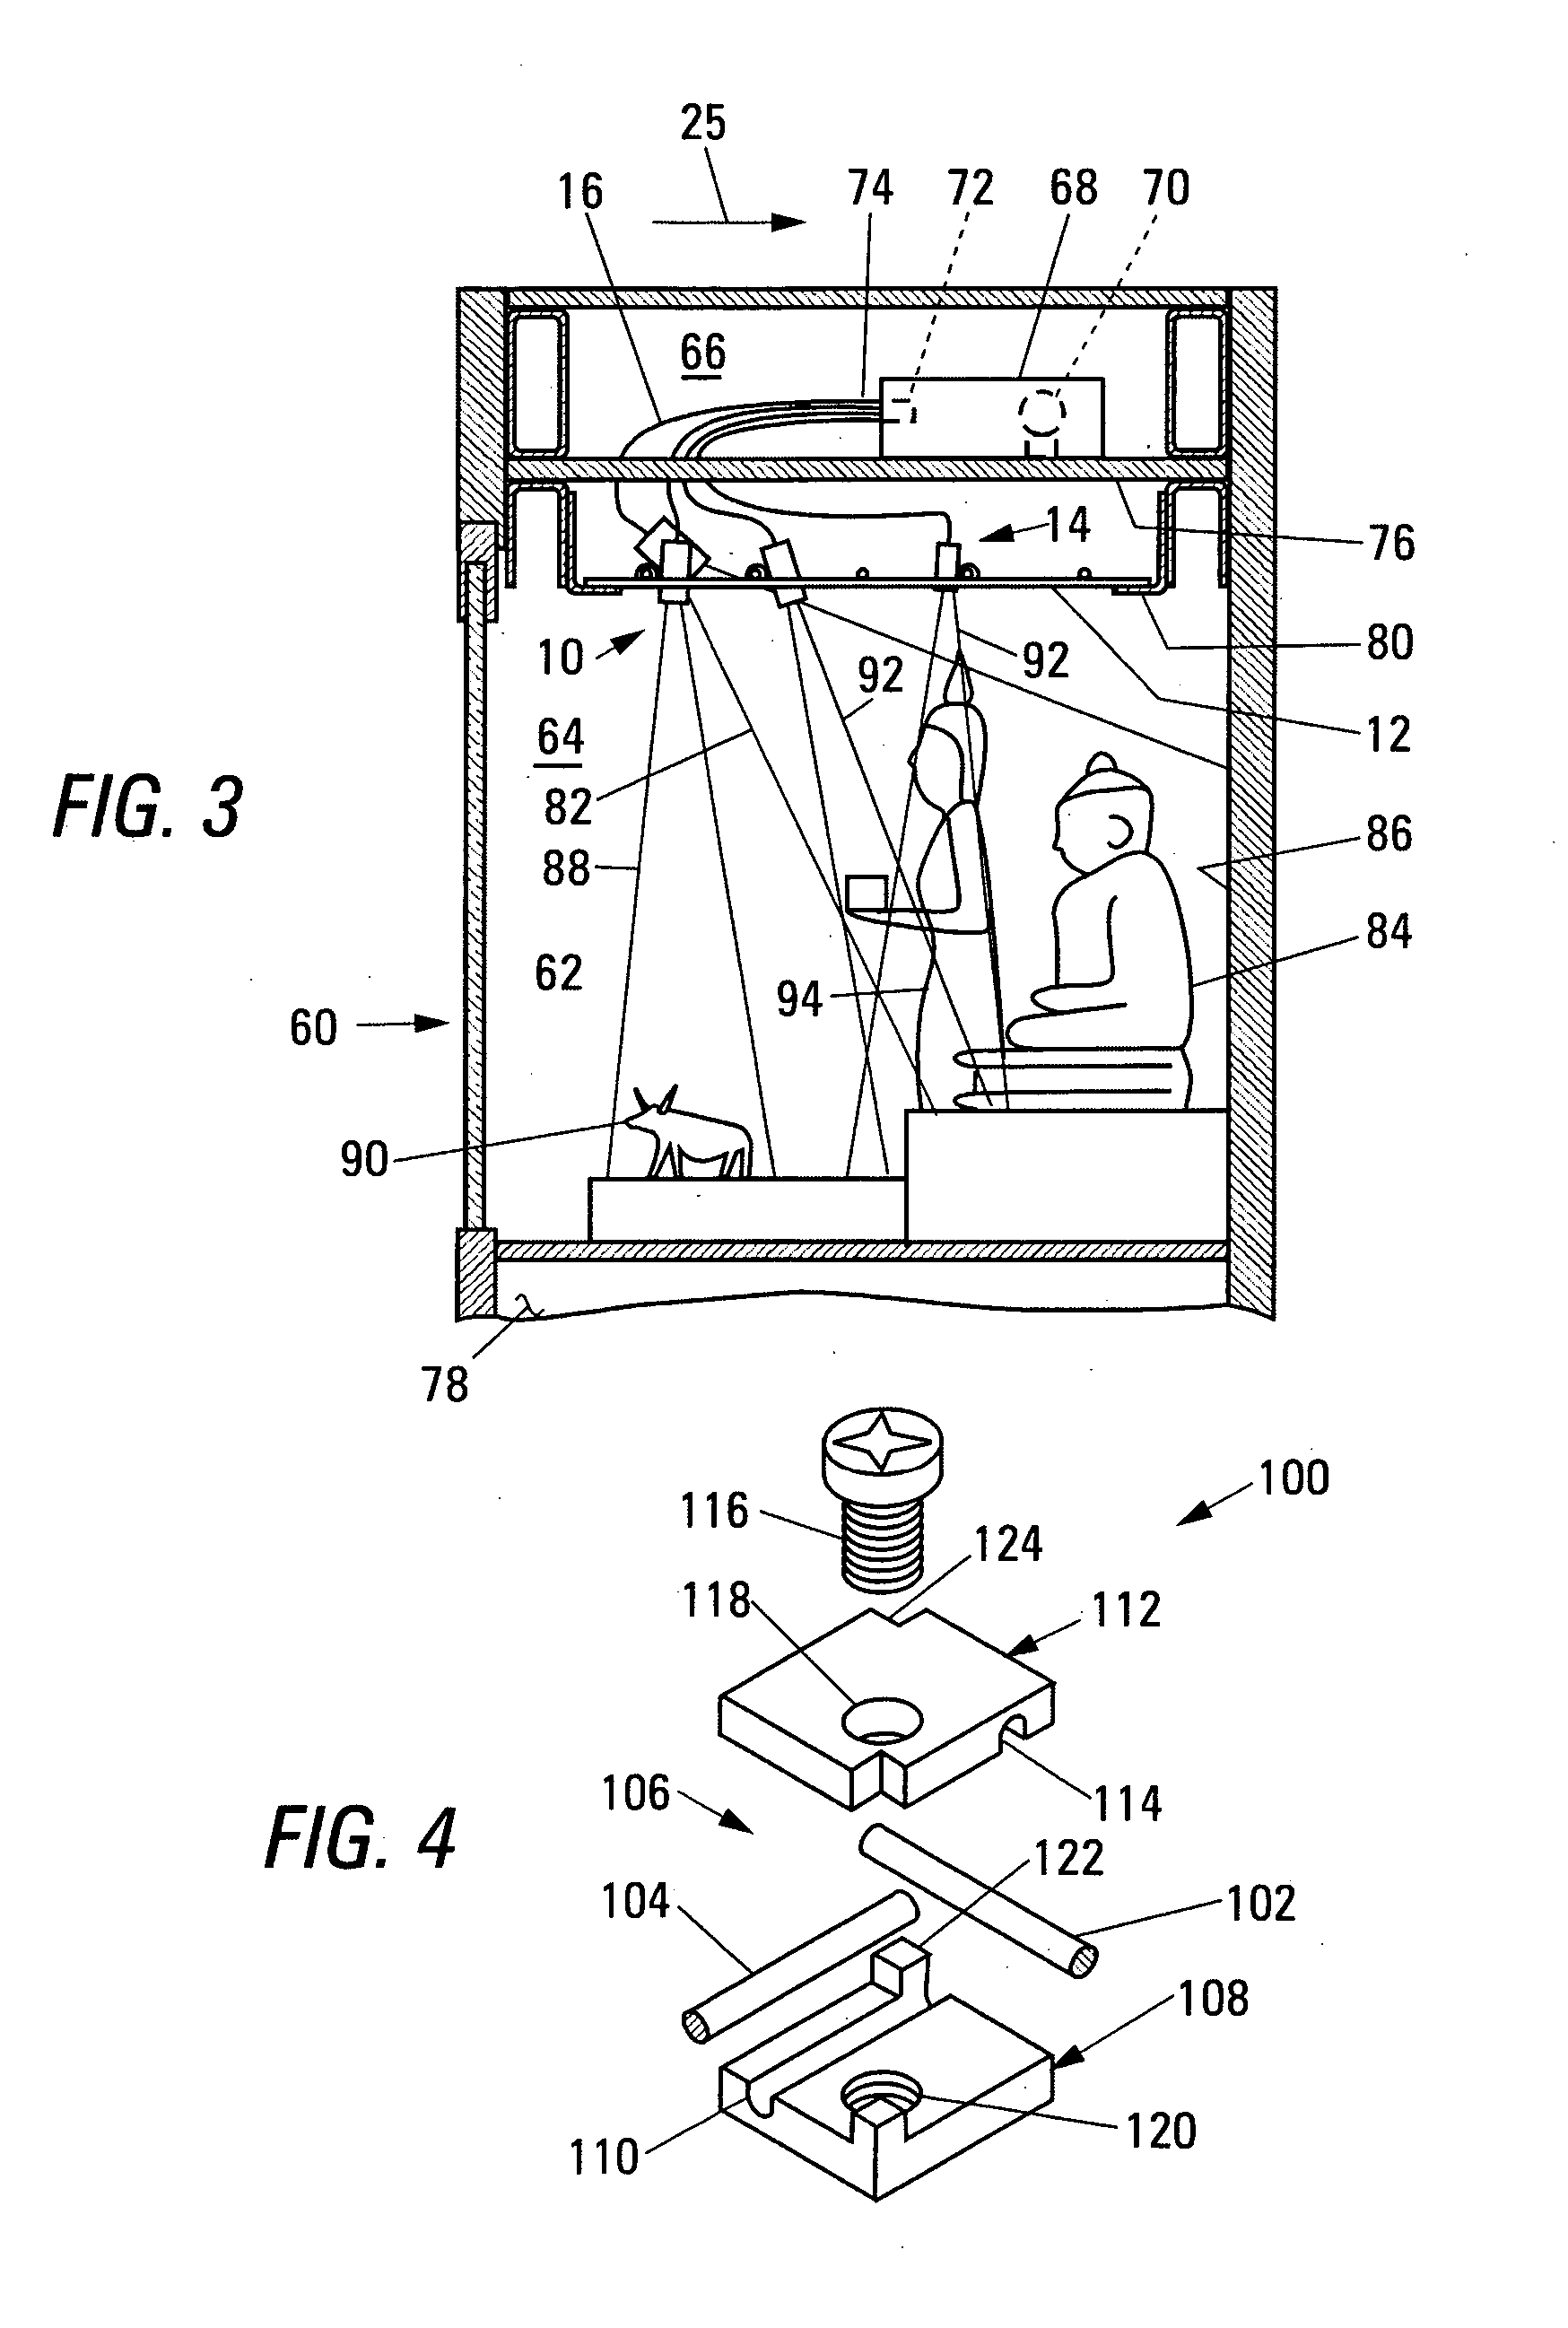 Lighting apparatus for a museum display case